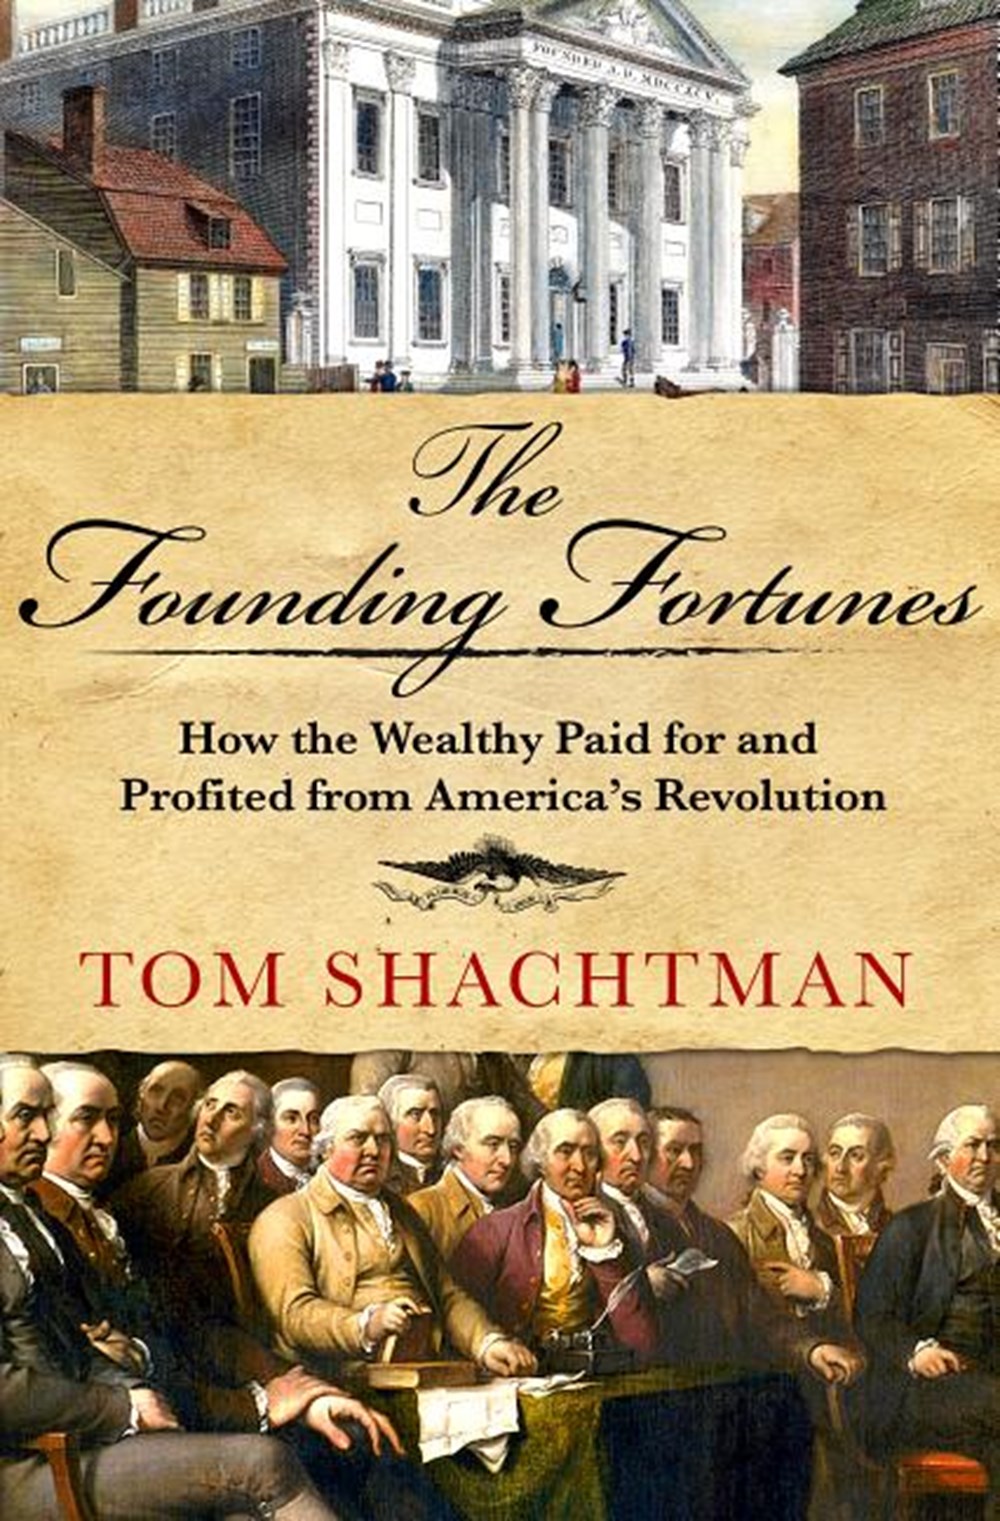 Founding Fortunes How the Wealthy Paid for and Profited from America's Revolution